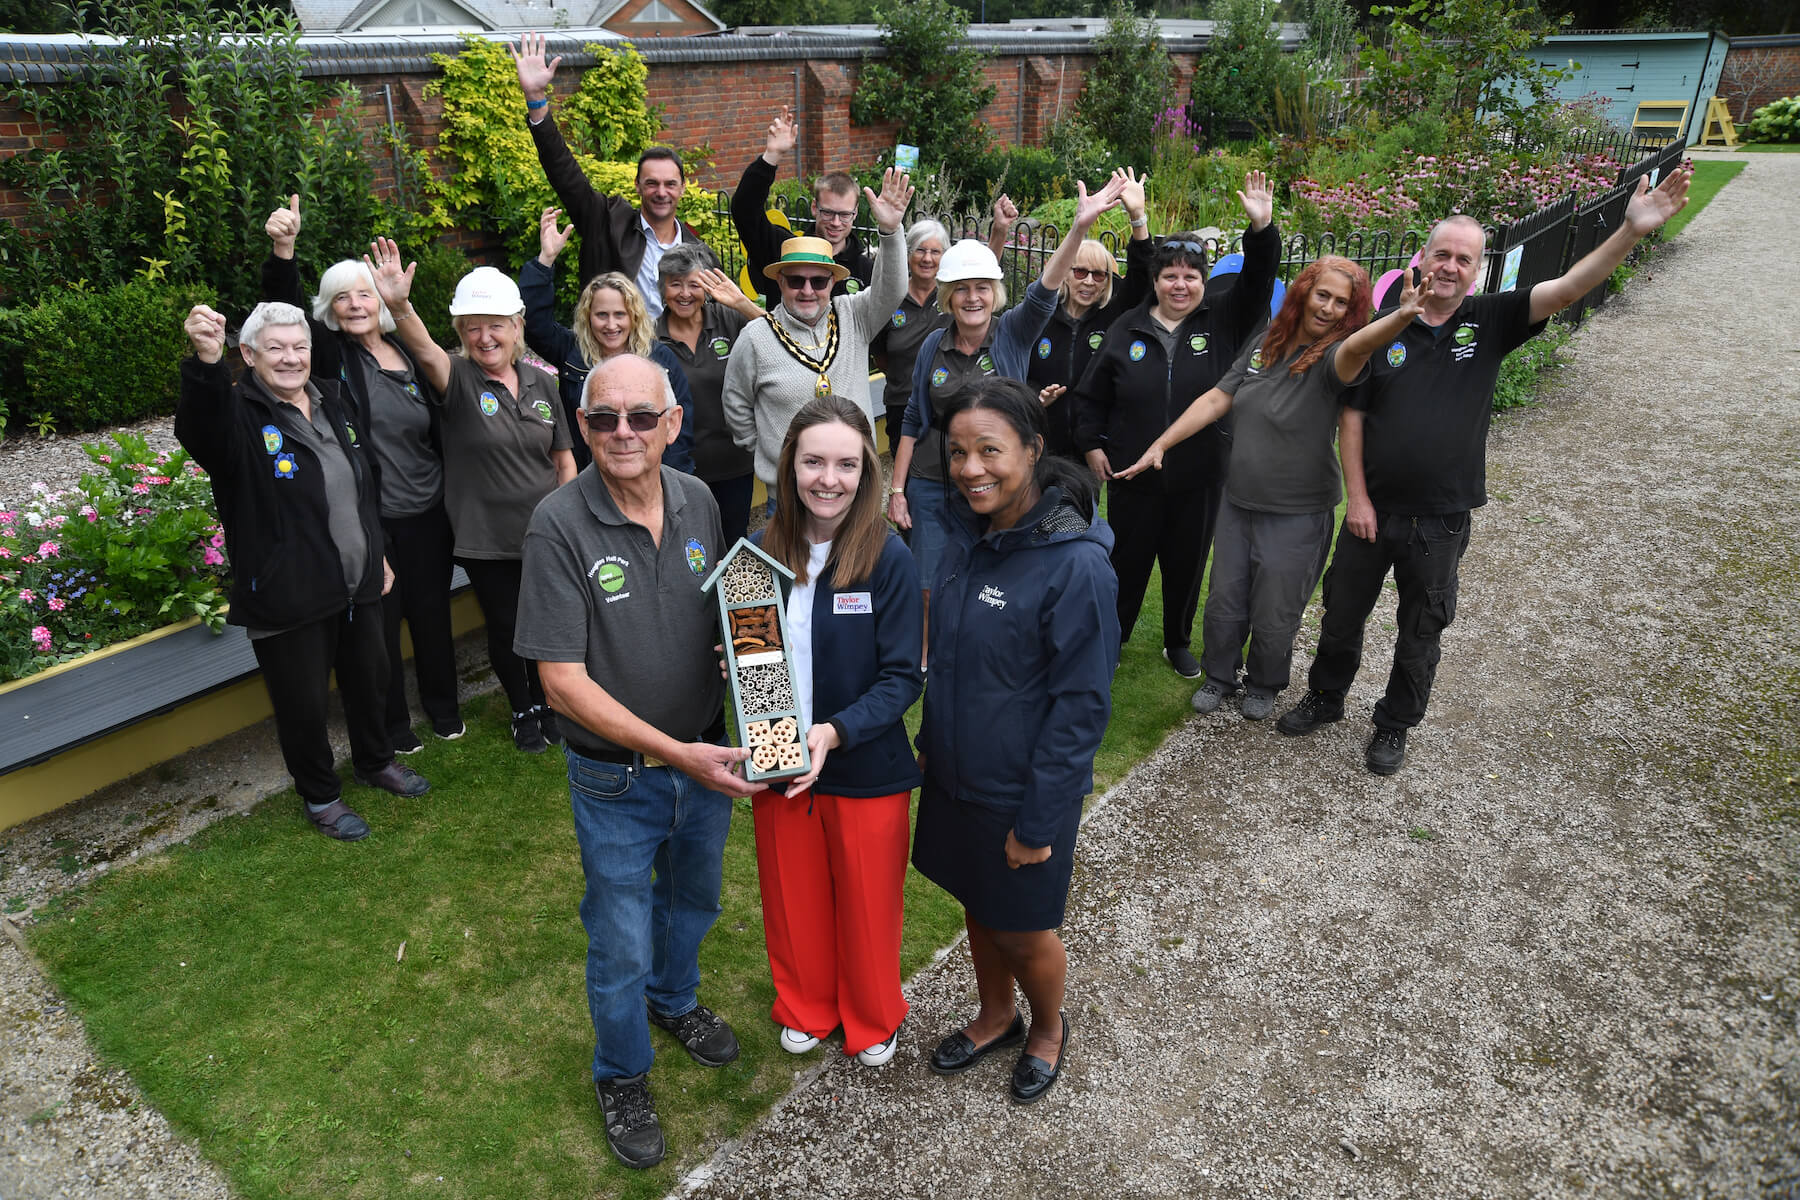 Taylor Wimpey donate a bird box to Houghton Hall Park